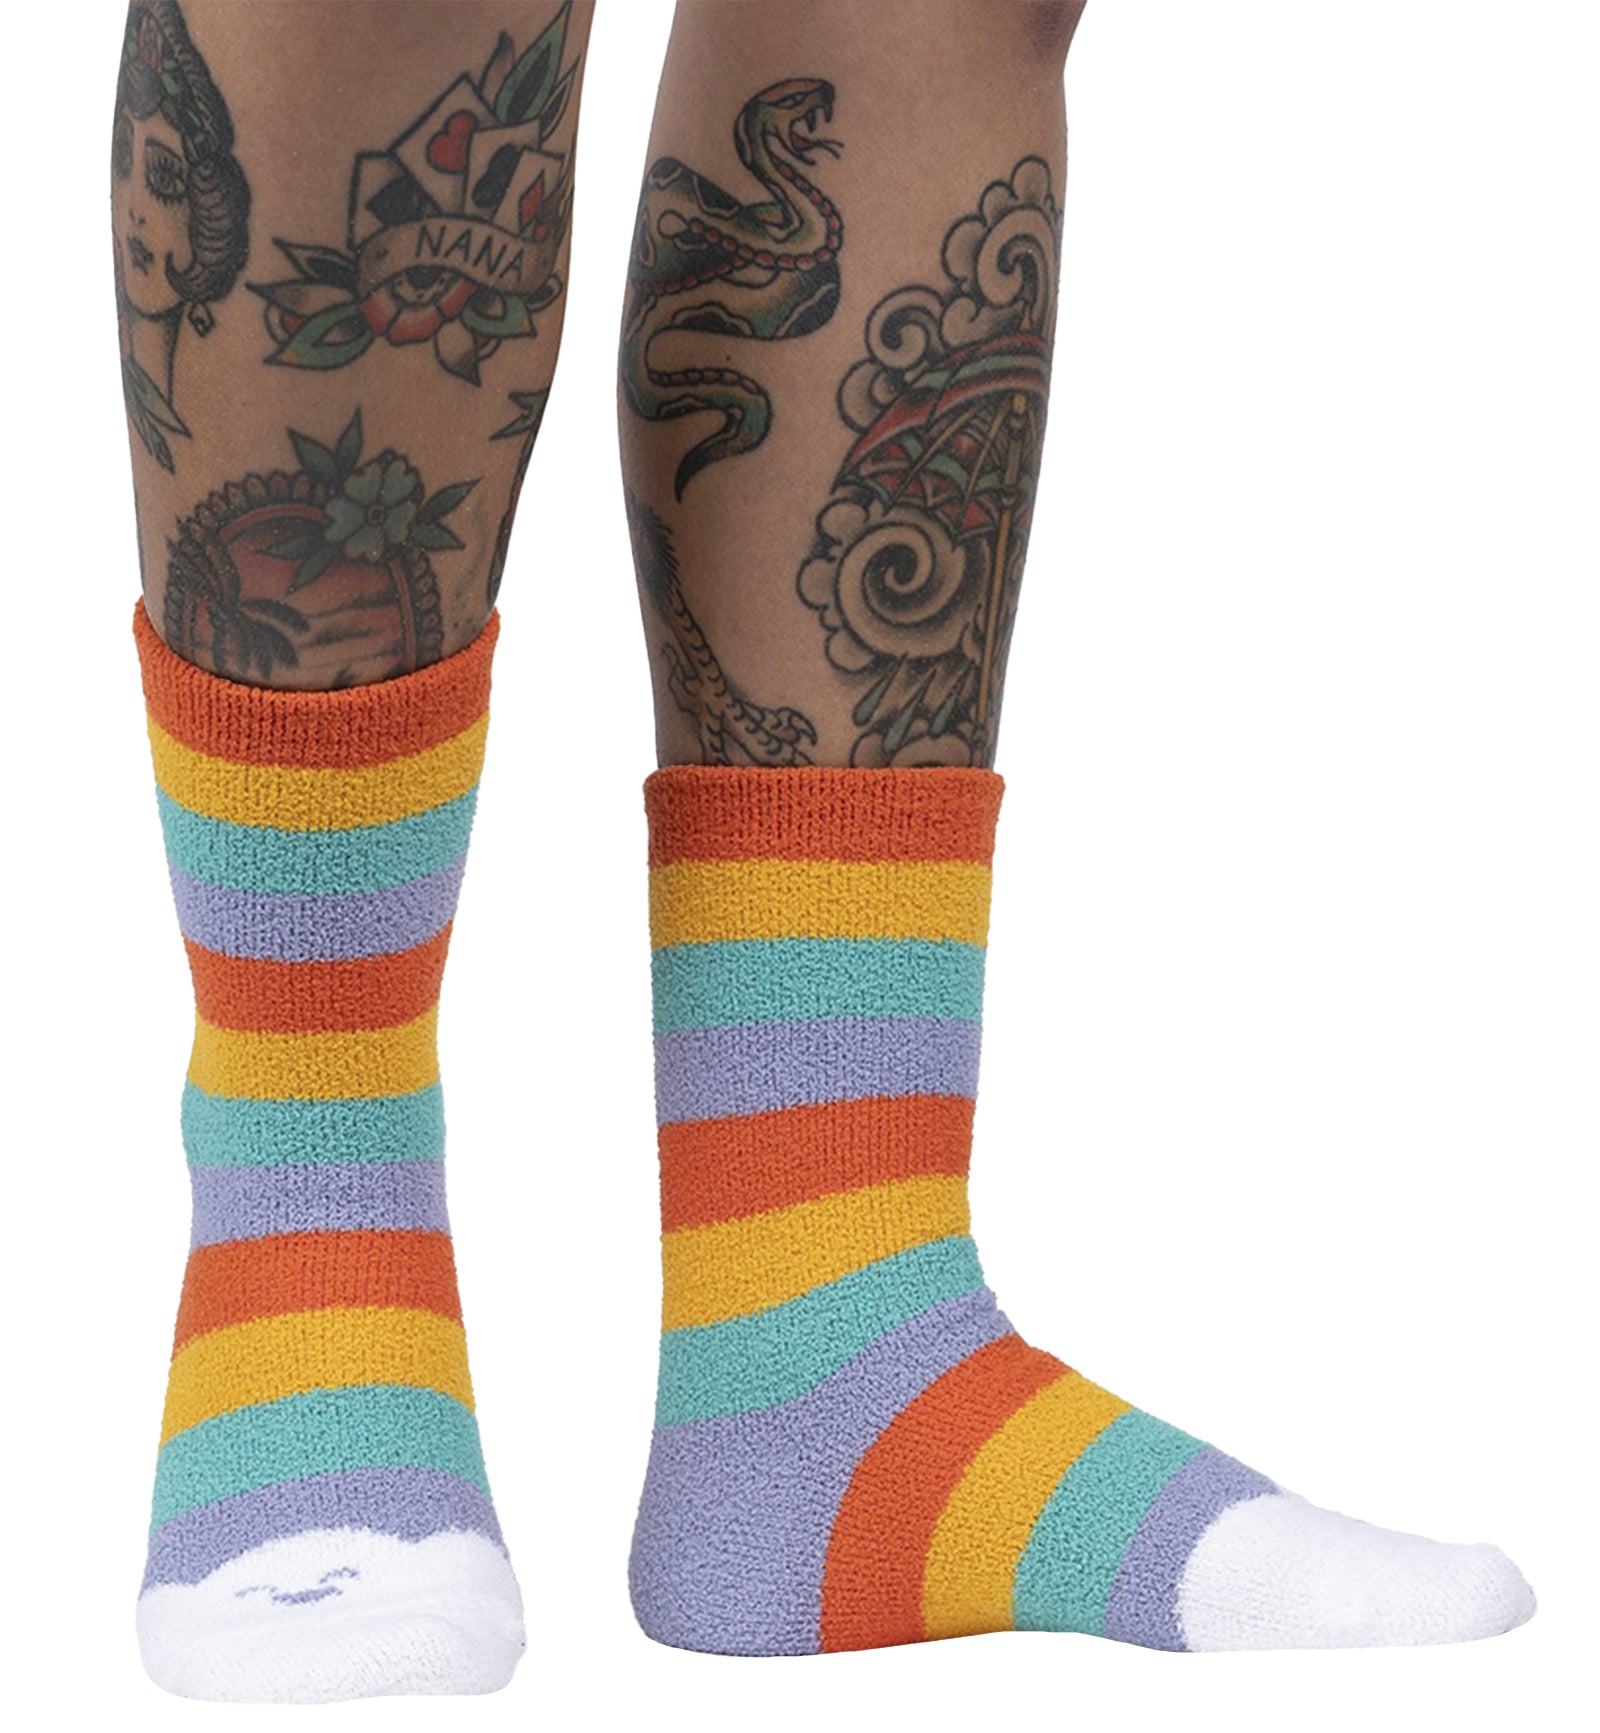 SOCK it to me Slipper Socks (CZ0002),Happy Toes - Happy Toes,One Size